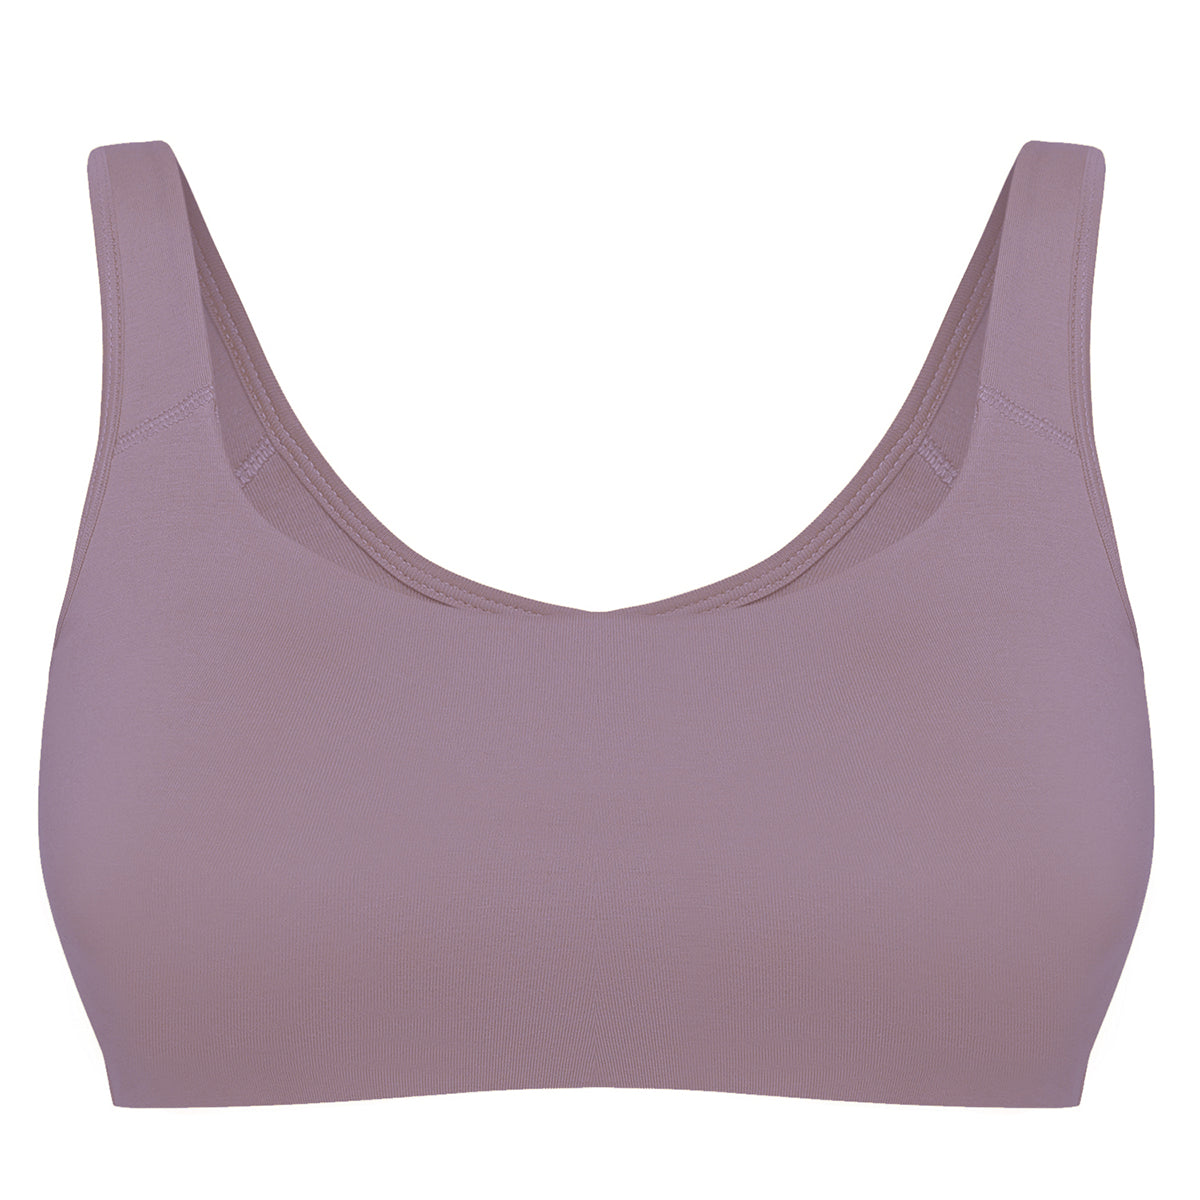 Soft cup easy-peasy slip-on bra with Full coverage - Purple NYB113 ...